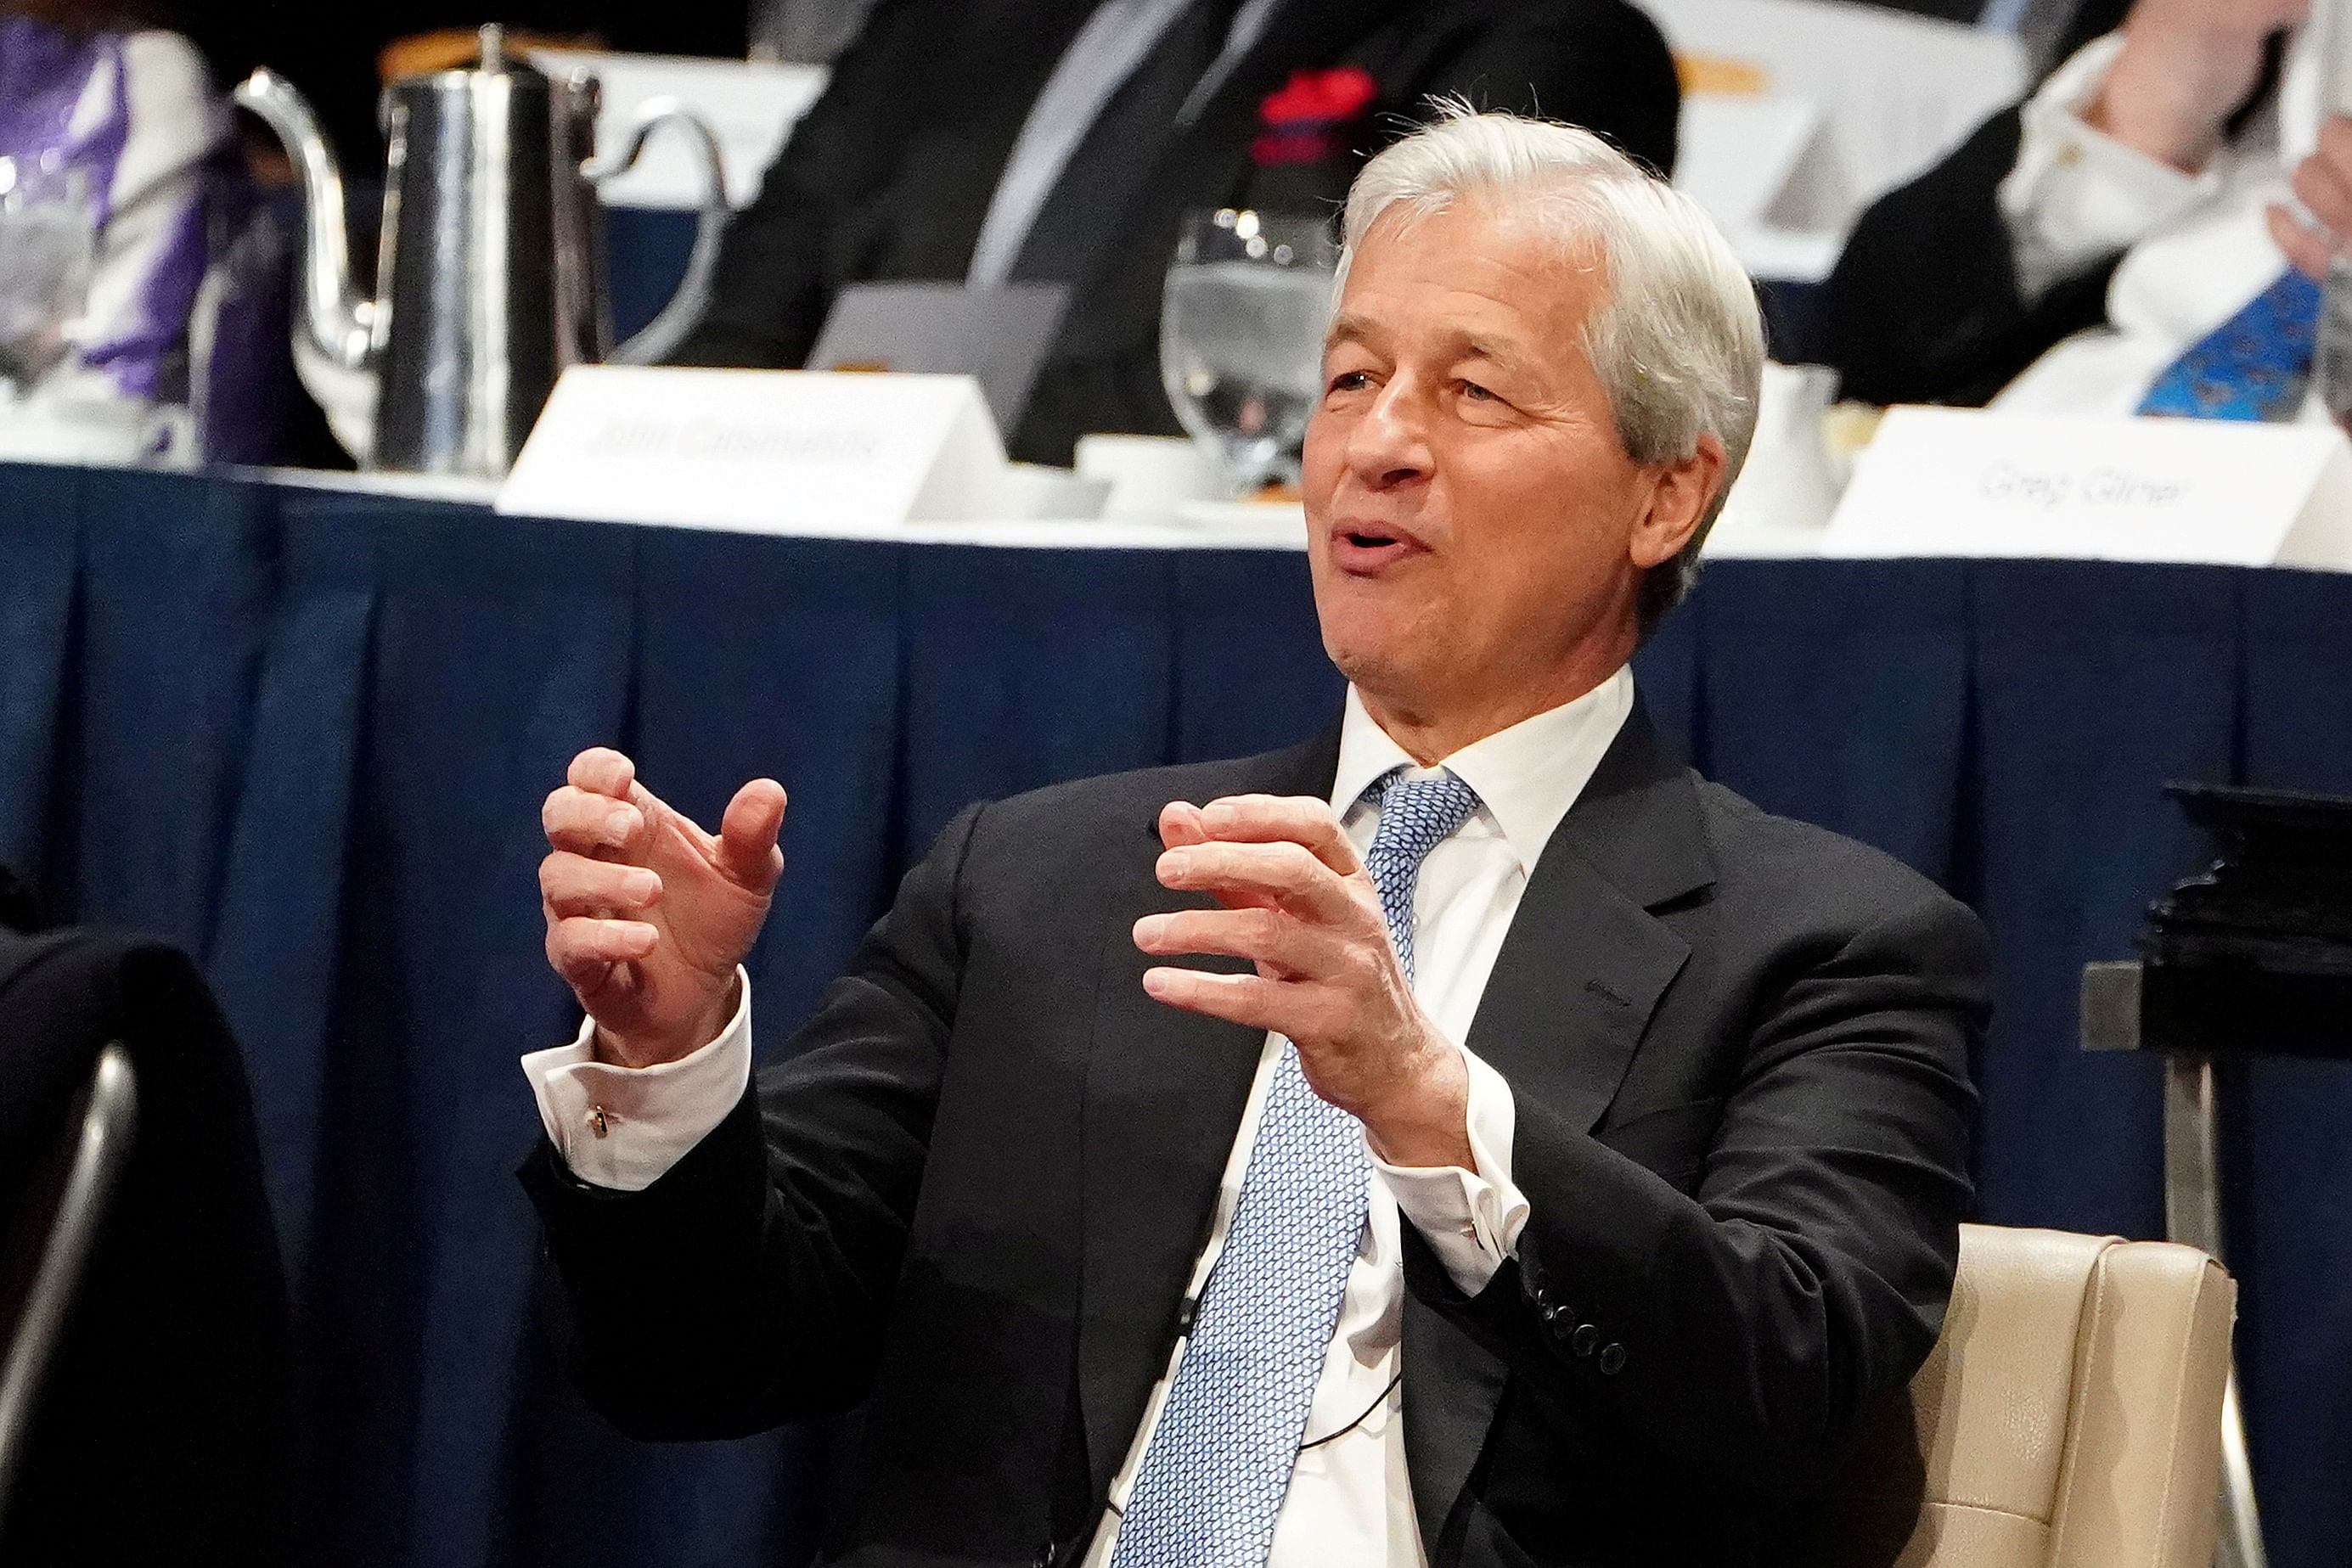 Jamie Dimon, CEO of JPMorgan Chase, speaks to the Economic Club of New York in the Manhattan borough of New York City, New York, US. (Reuters Photo)